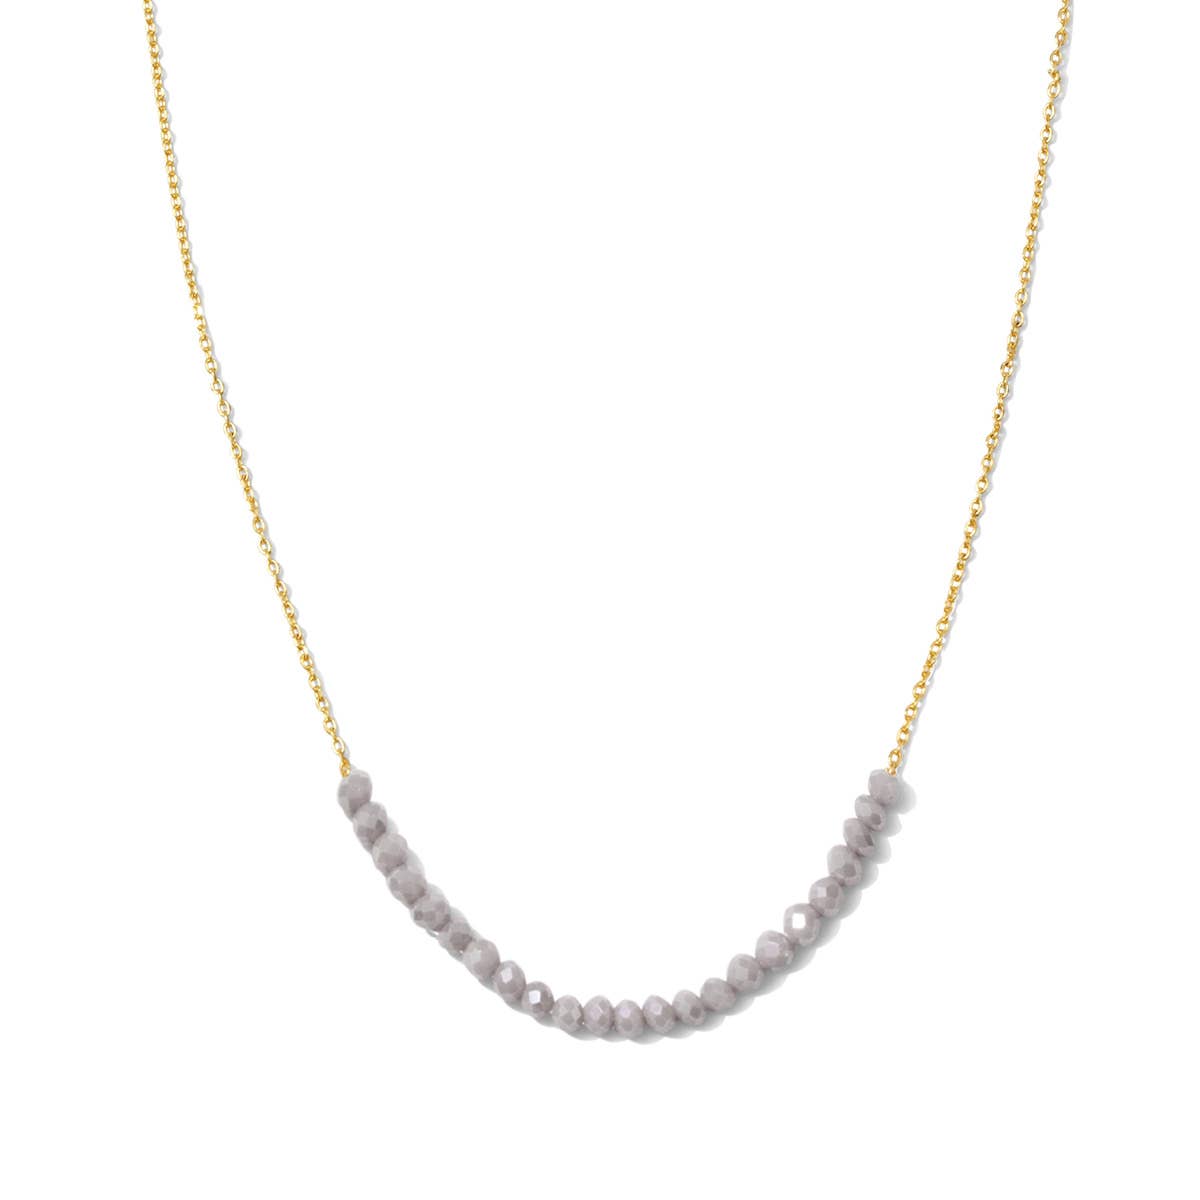 Splendid Iris - Delicate Crystal Accented Necklace: Navy